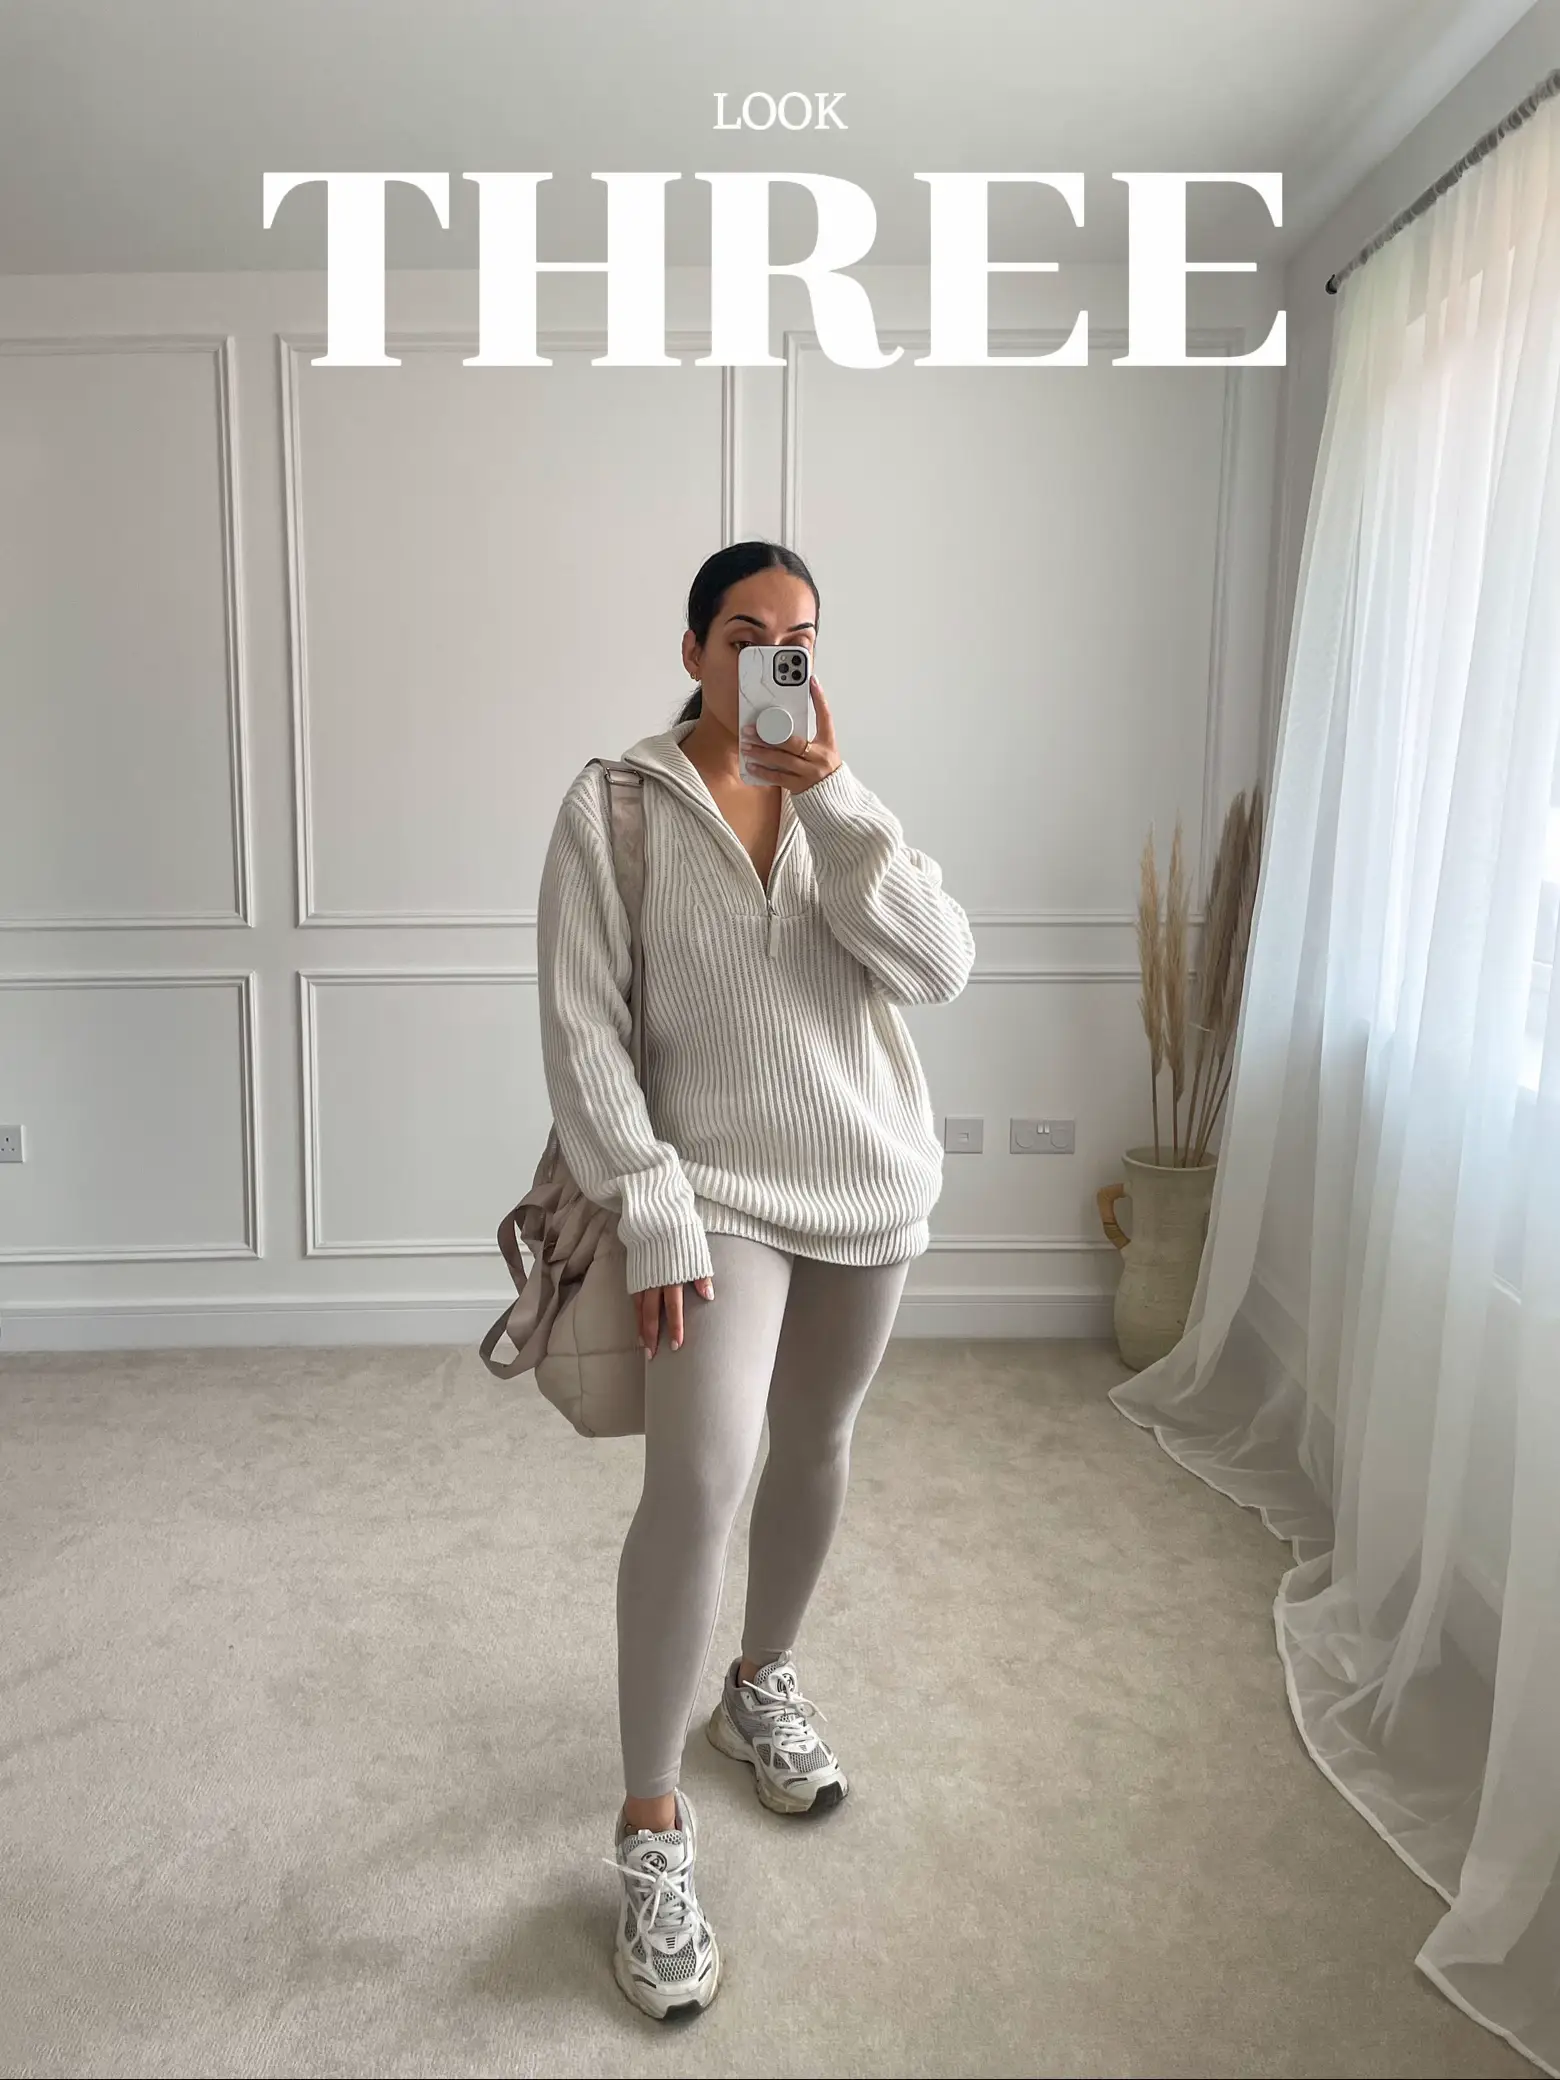 Kendall Jenner and I Agree: These Are the Most Flattering Black Leggings   Outfits with leggings, Leggings outfit casual, Cute outfits with leggings